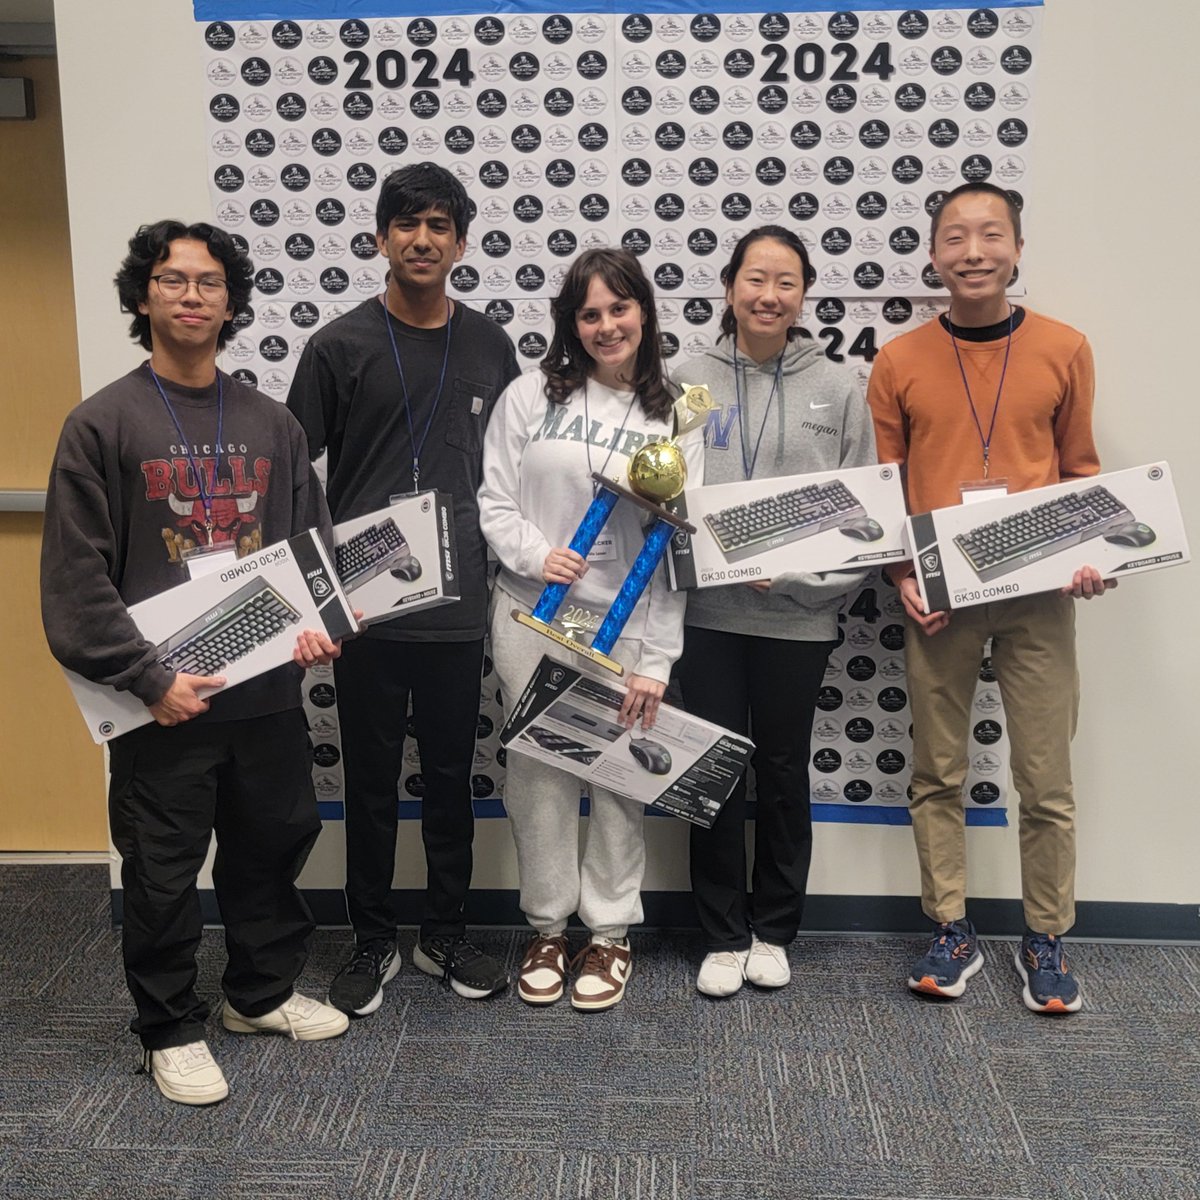 Congratulations to the VitalSync team from Westlake High School! They're the overall winners of the 2024 VCOE Hackathon by the Sea. See the full list of winning teams from throughout Ventura County at buff.ly/3Ssyg8H @WestlakeHS_CA @ConejoValleyUSD